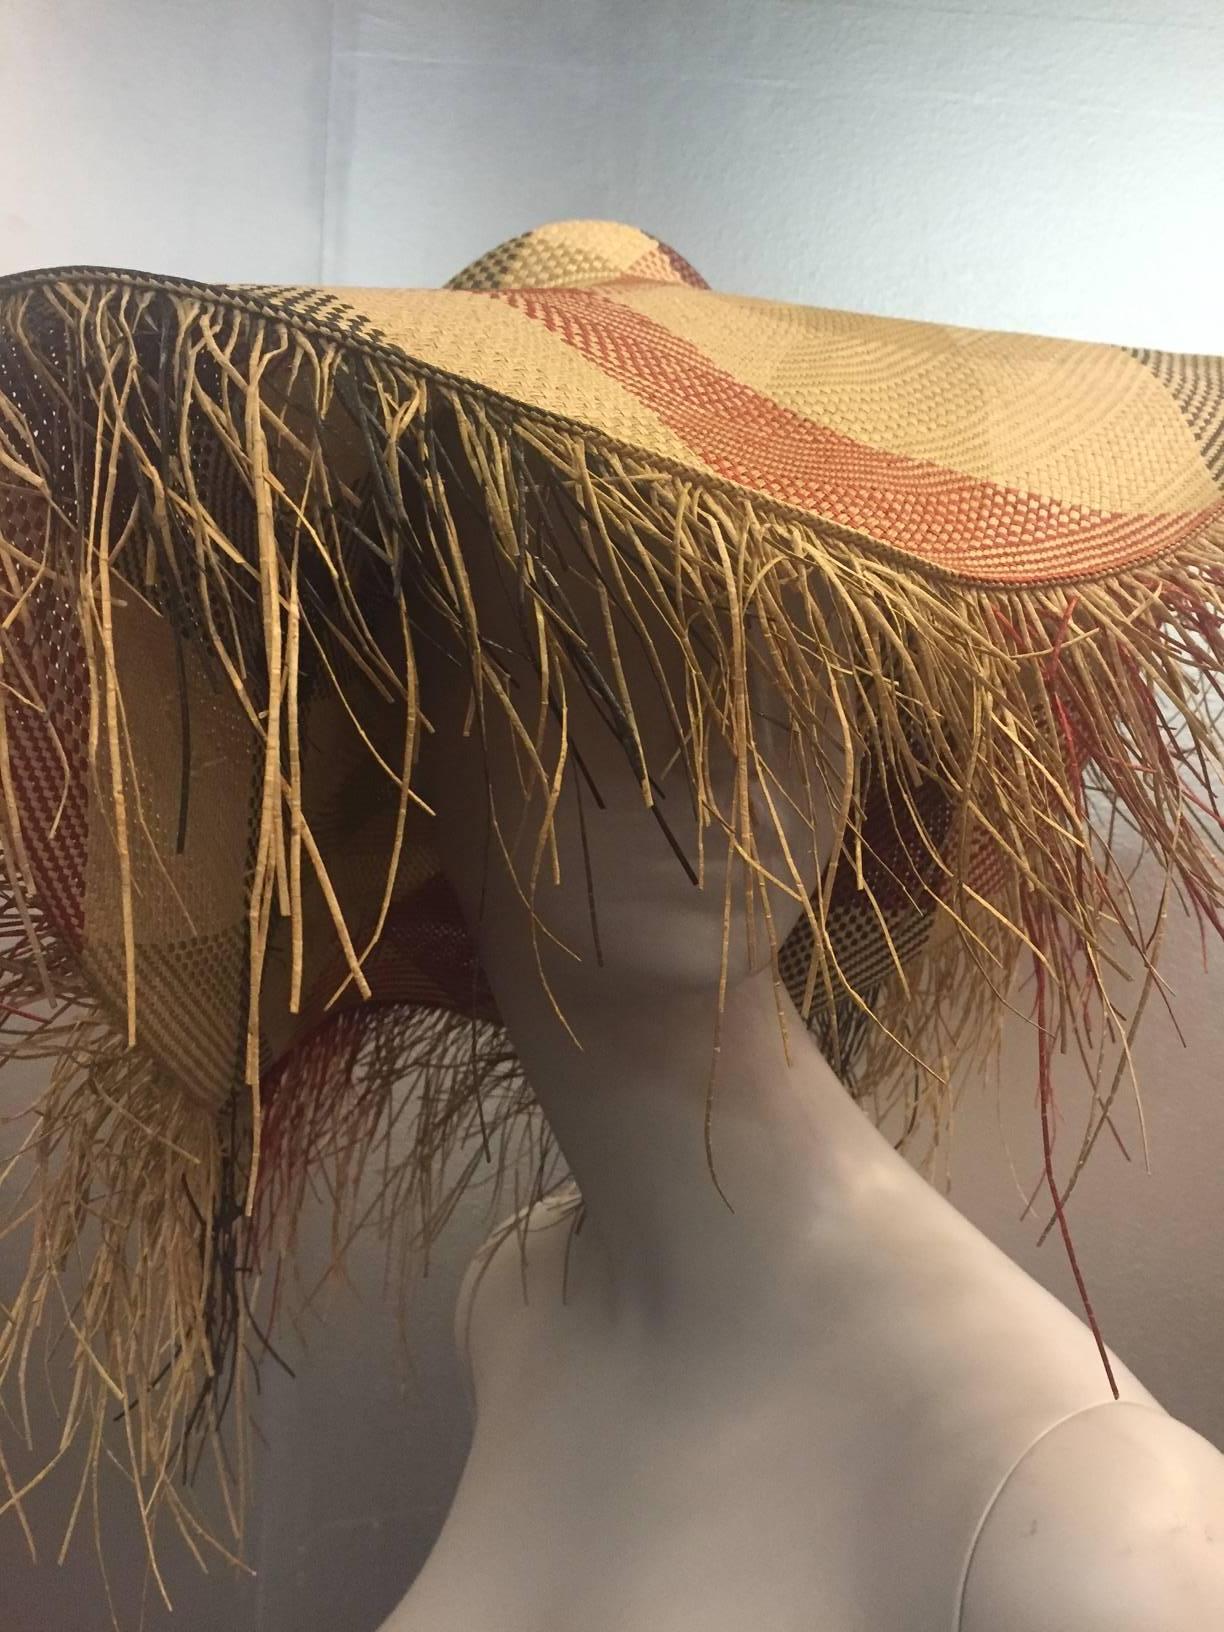 Gorgeous and dramatic 1940s woven plaid straw sun hat with dramatic straw fringed brim.  Colors are navy, olive, burgundy and natural straw.  6.5